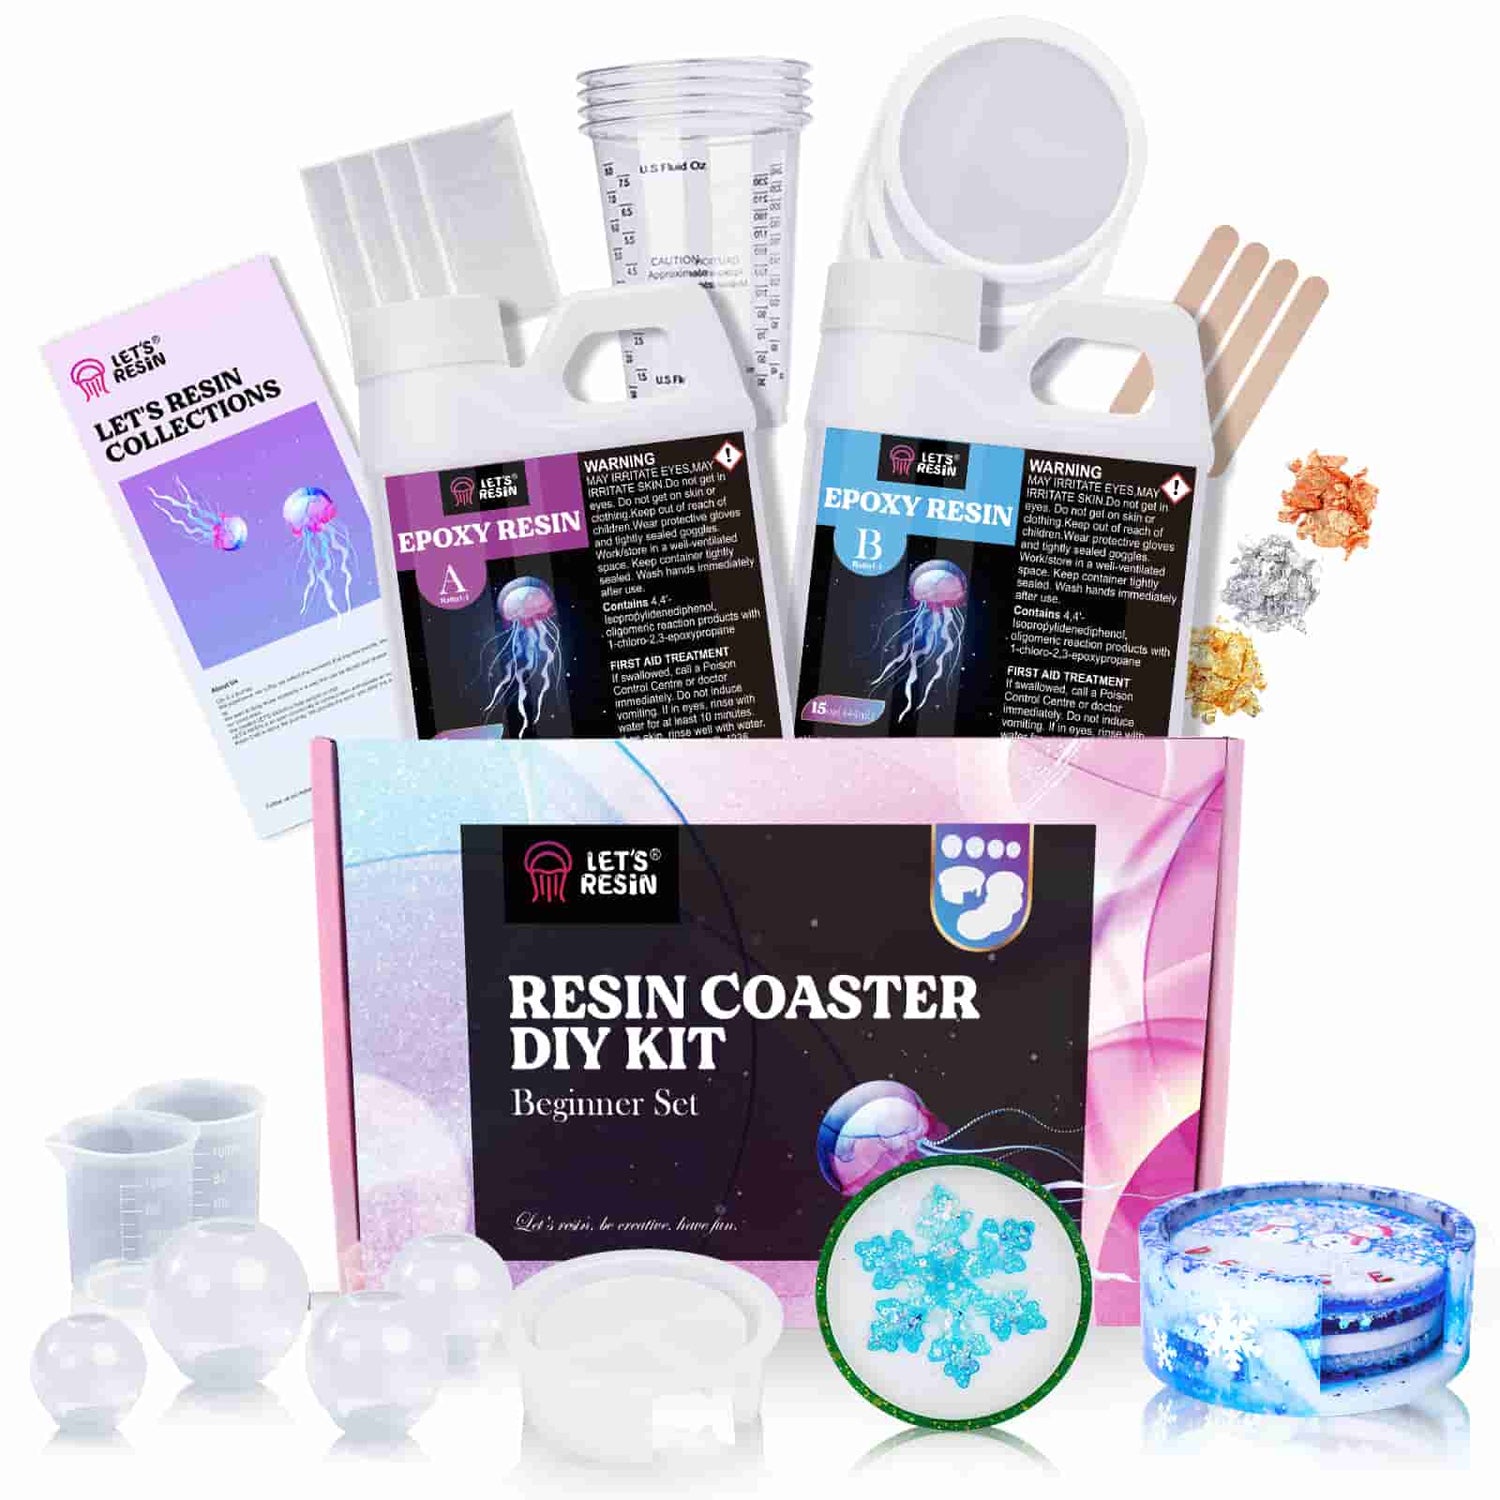 DIY Epoxy Resin Kit, Space Clock Do It Yourself, Colorful Art Kit